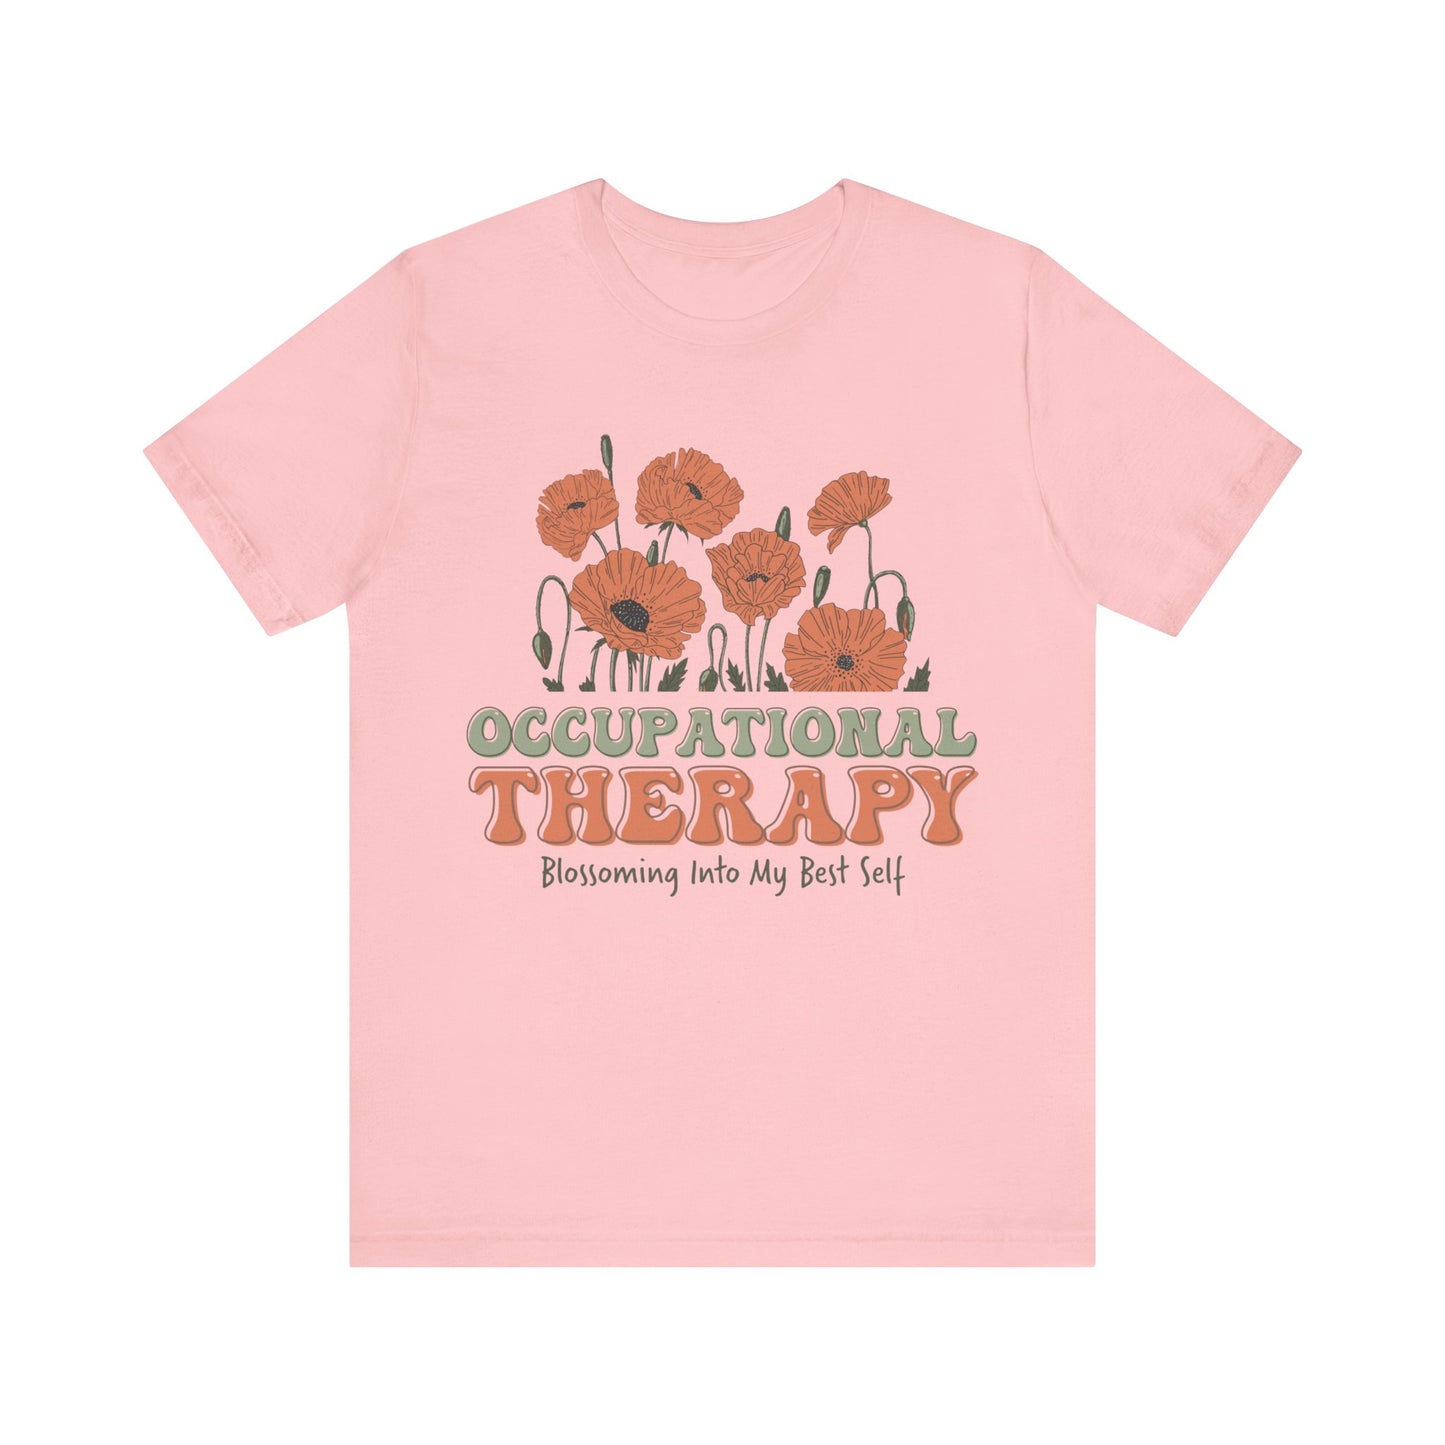 Occupational Therapy Shirt, Blossoming Into My Best Self Shirt, OT Shirt, Gift for Therapist,